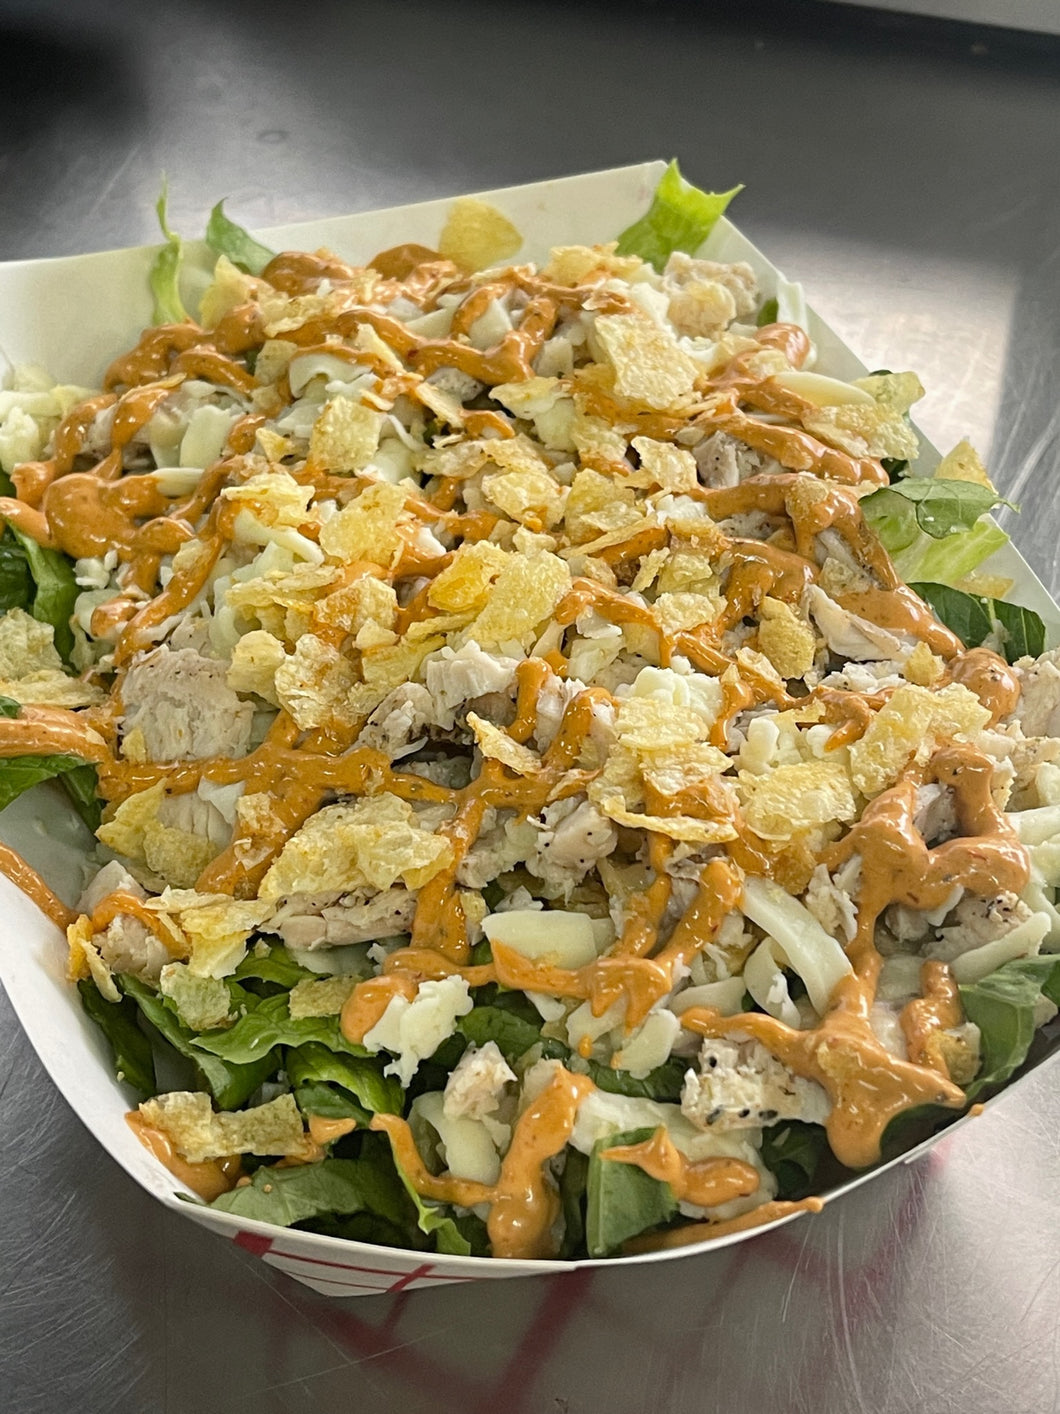 The Chicken Roll Up Salad